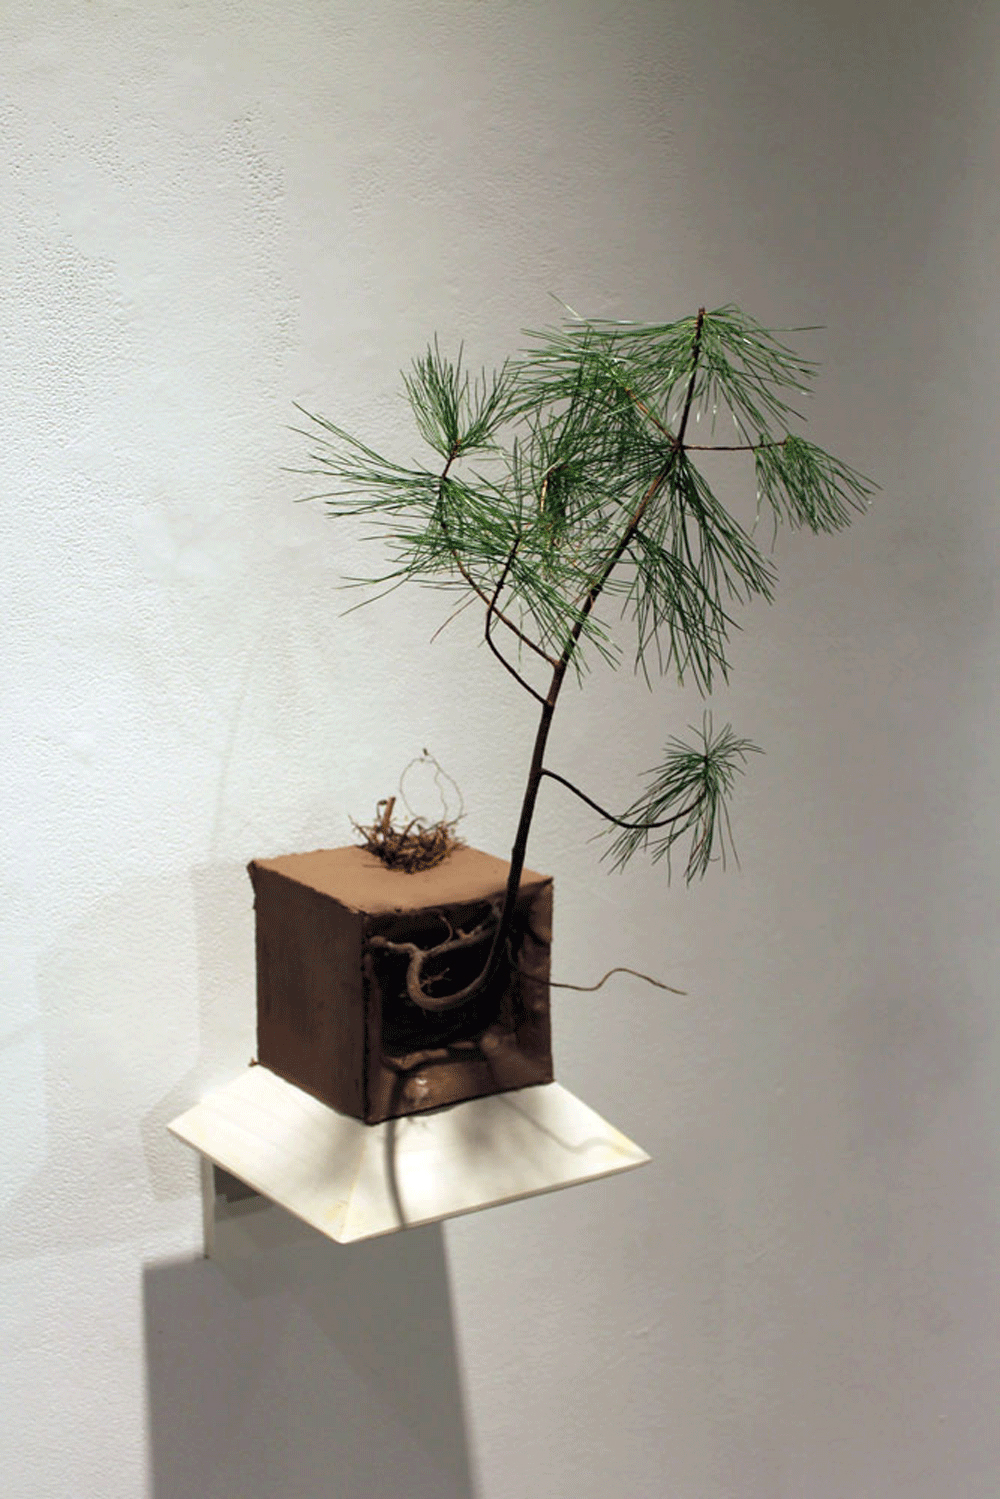 evergreen sapling grows from clay cube